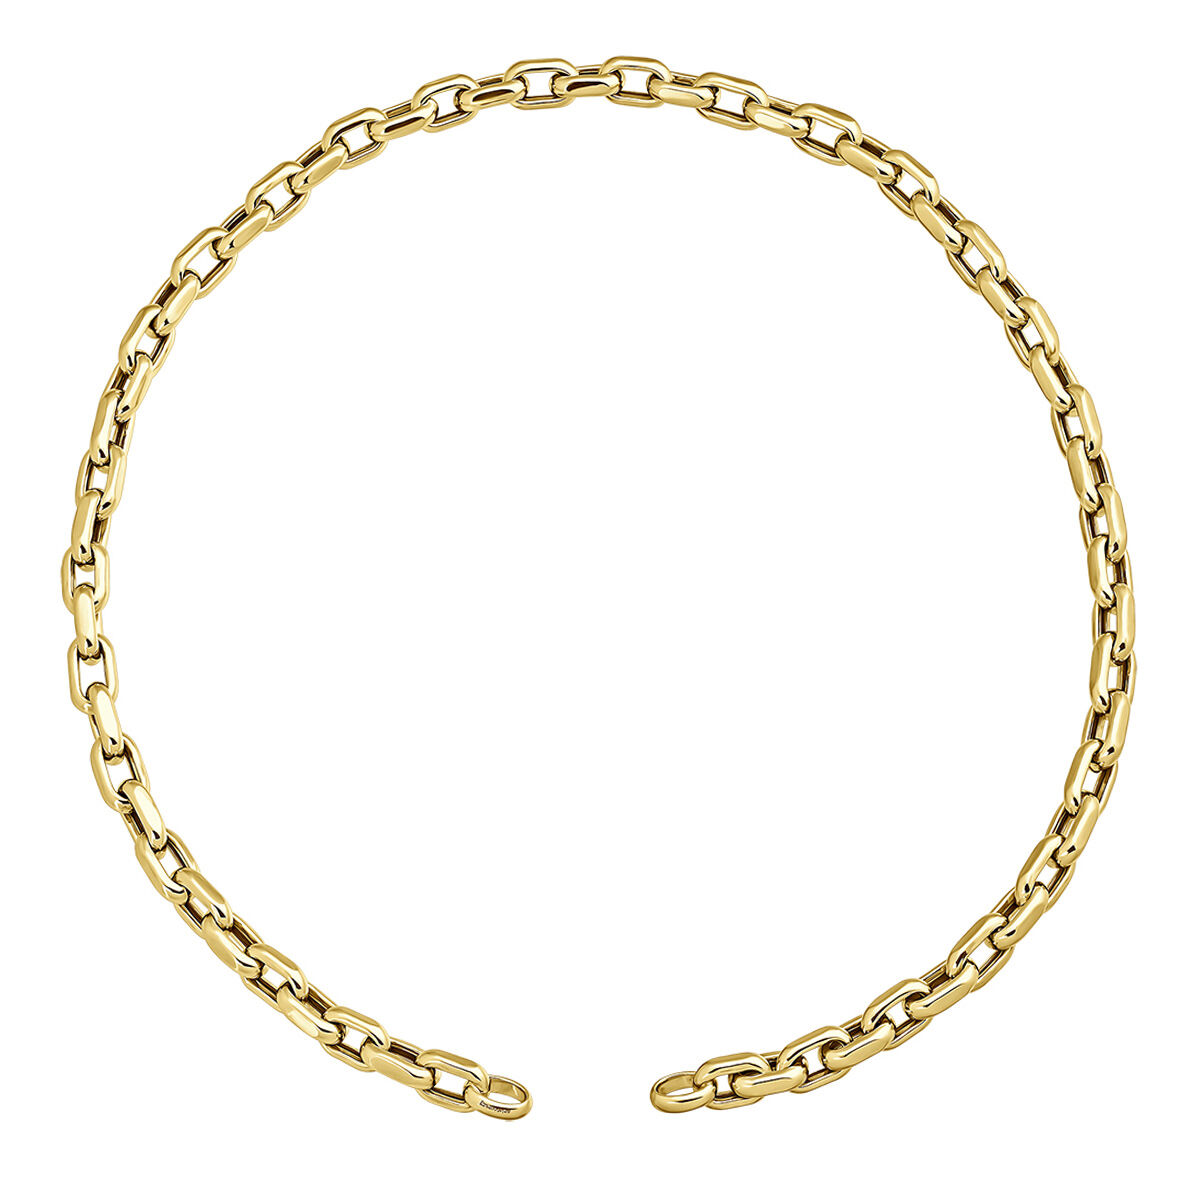 Cable link chain in 18k yellow gold-plated silver, J05336-02-45, hi-res